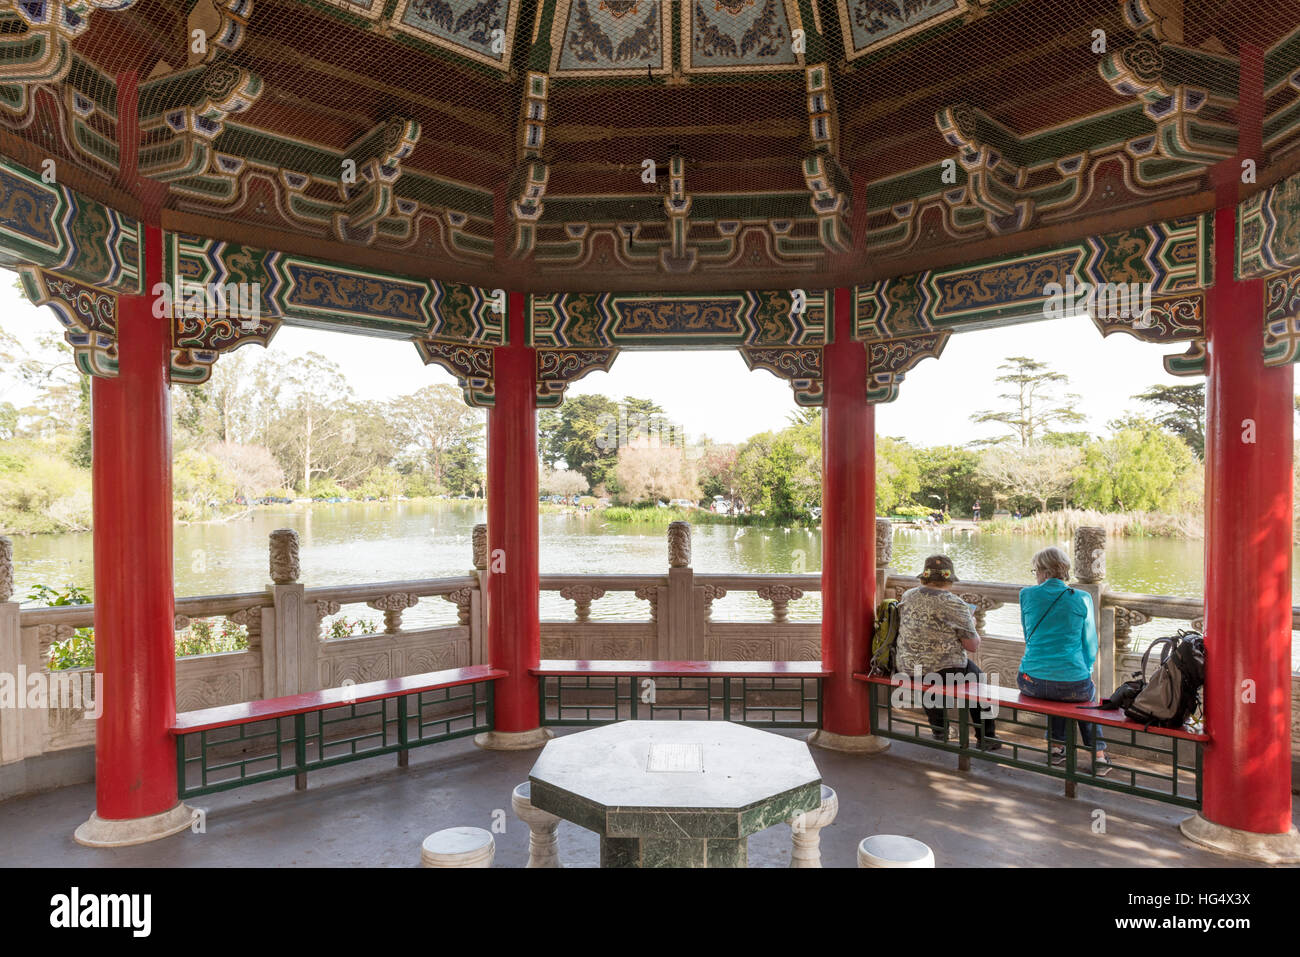 Looking out from the Chinese Pavilion at Stow Lake in Golden Gate Park, San Francisco, California, USA Stock Photo